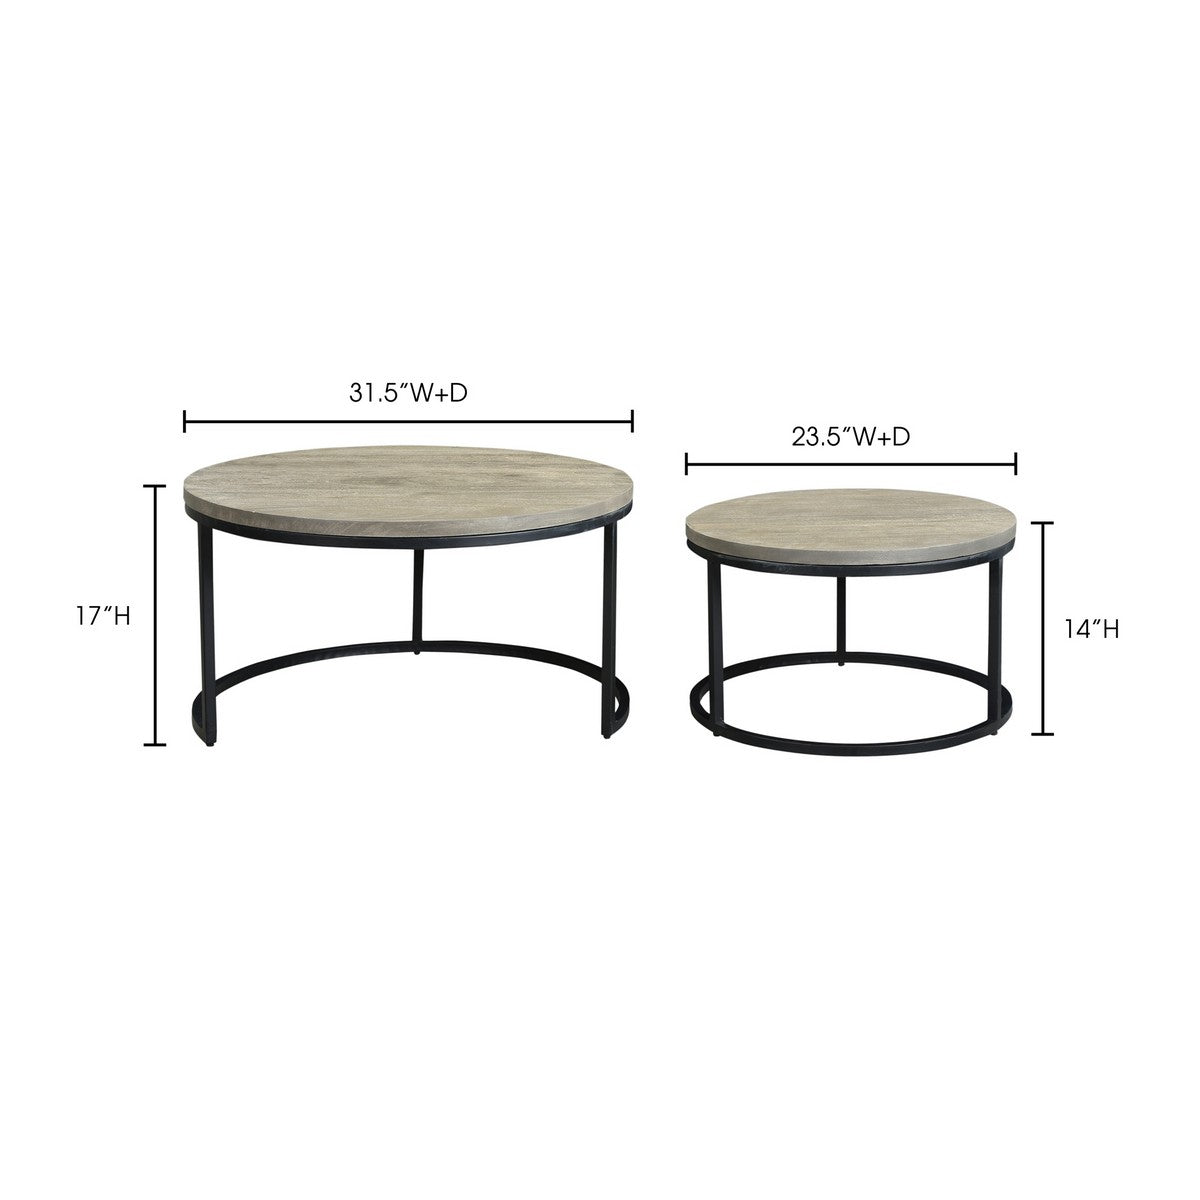 Moe's Home Collection Drey Round Nesting Coffee Tables Set of Two - BV-1011-15